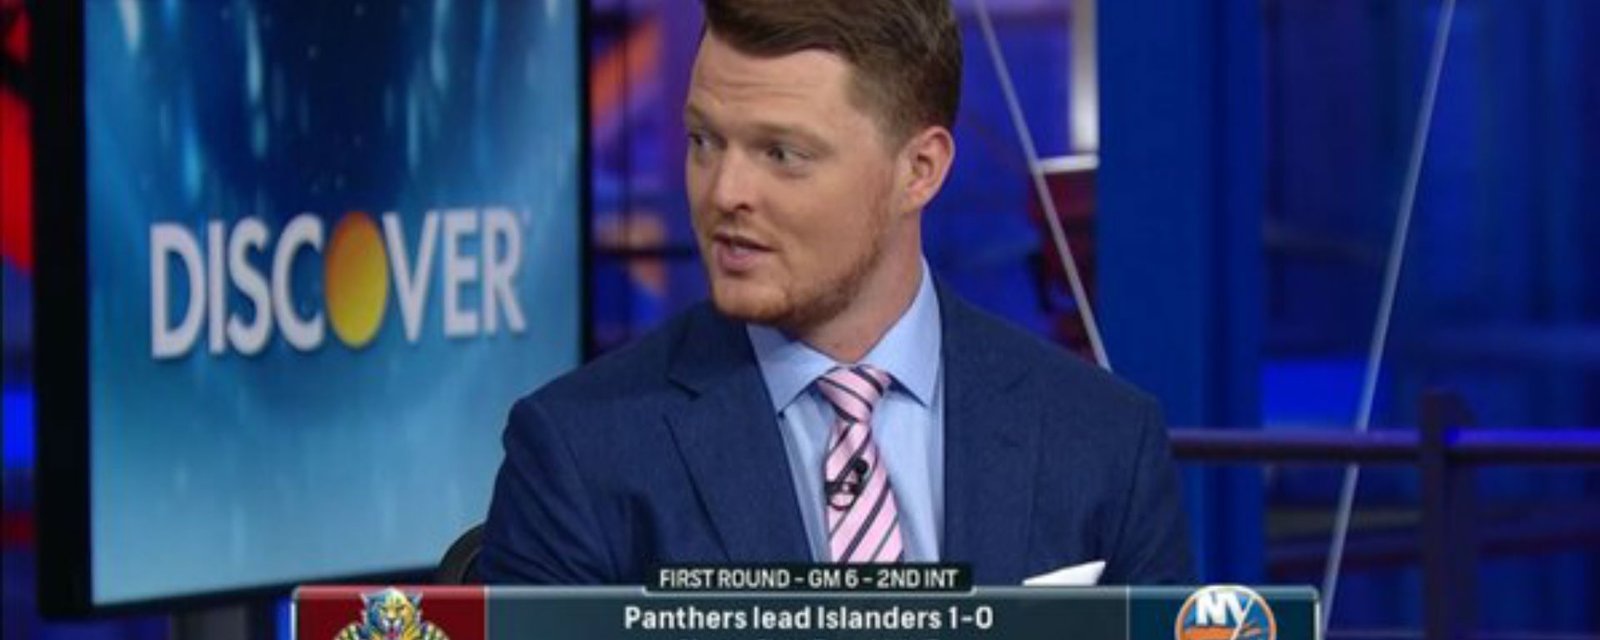 Cory Schneider Analyzes The Hall-for-Larsson Trade